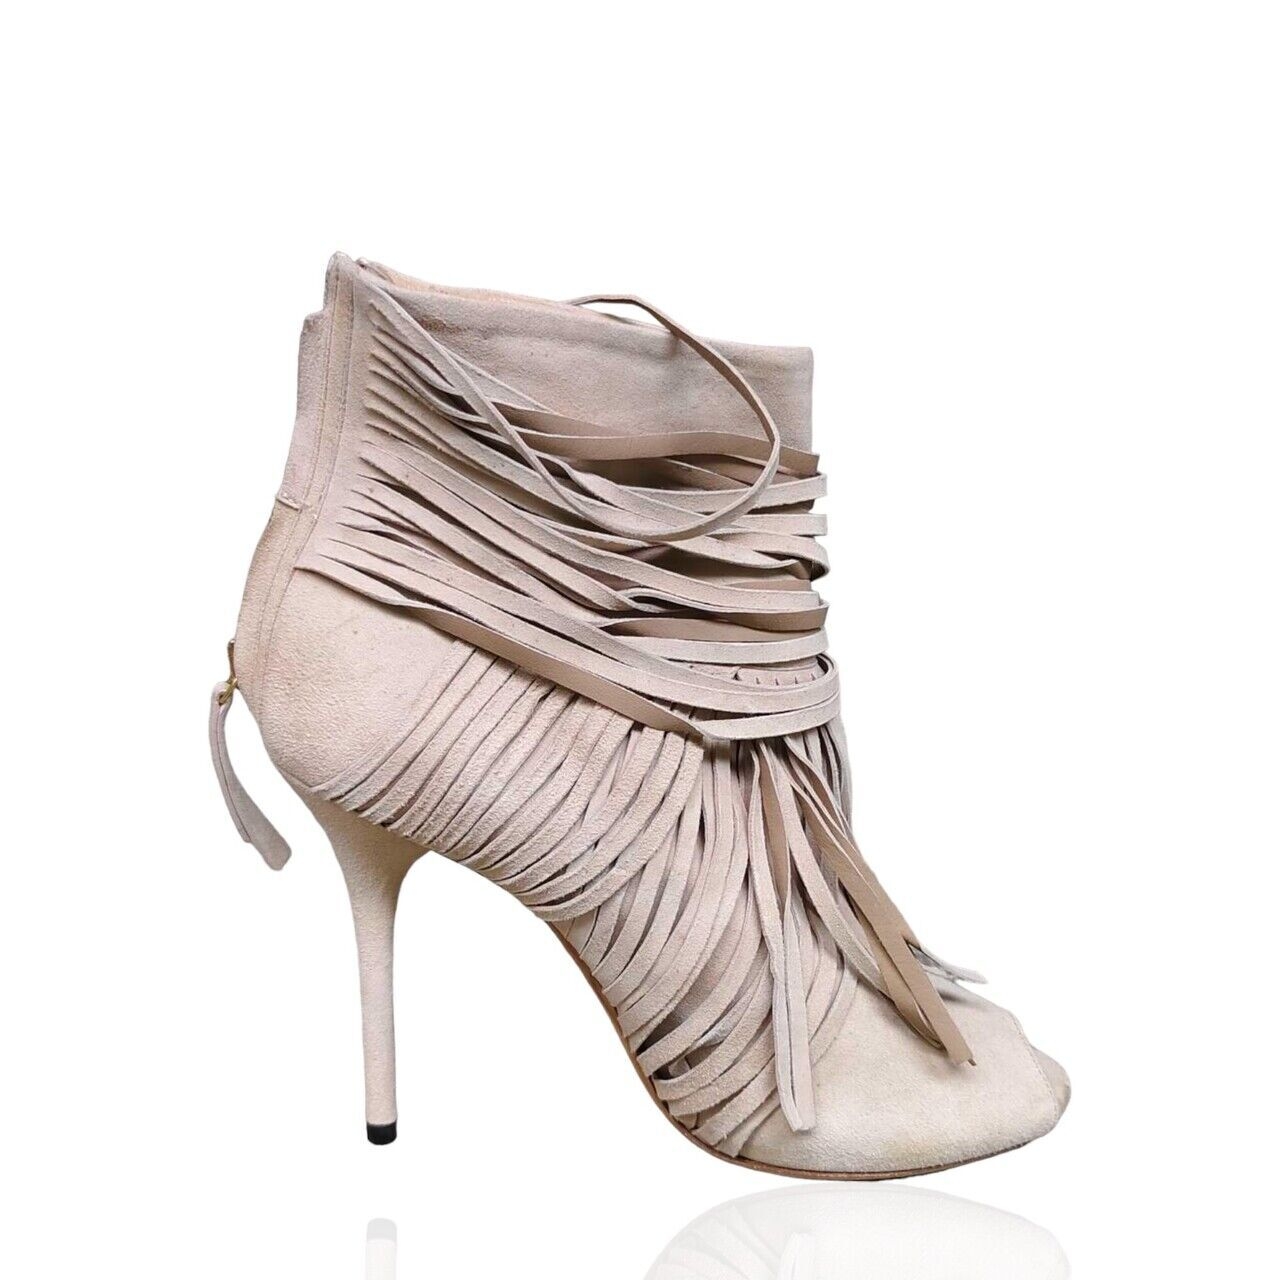 Gucci Fringe Ankle Boots